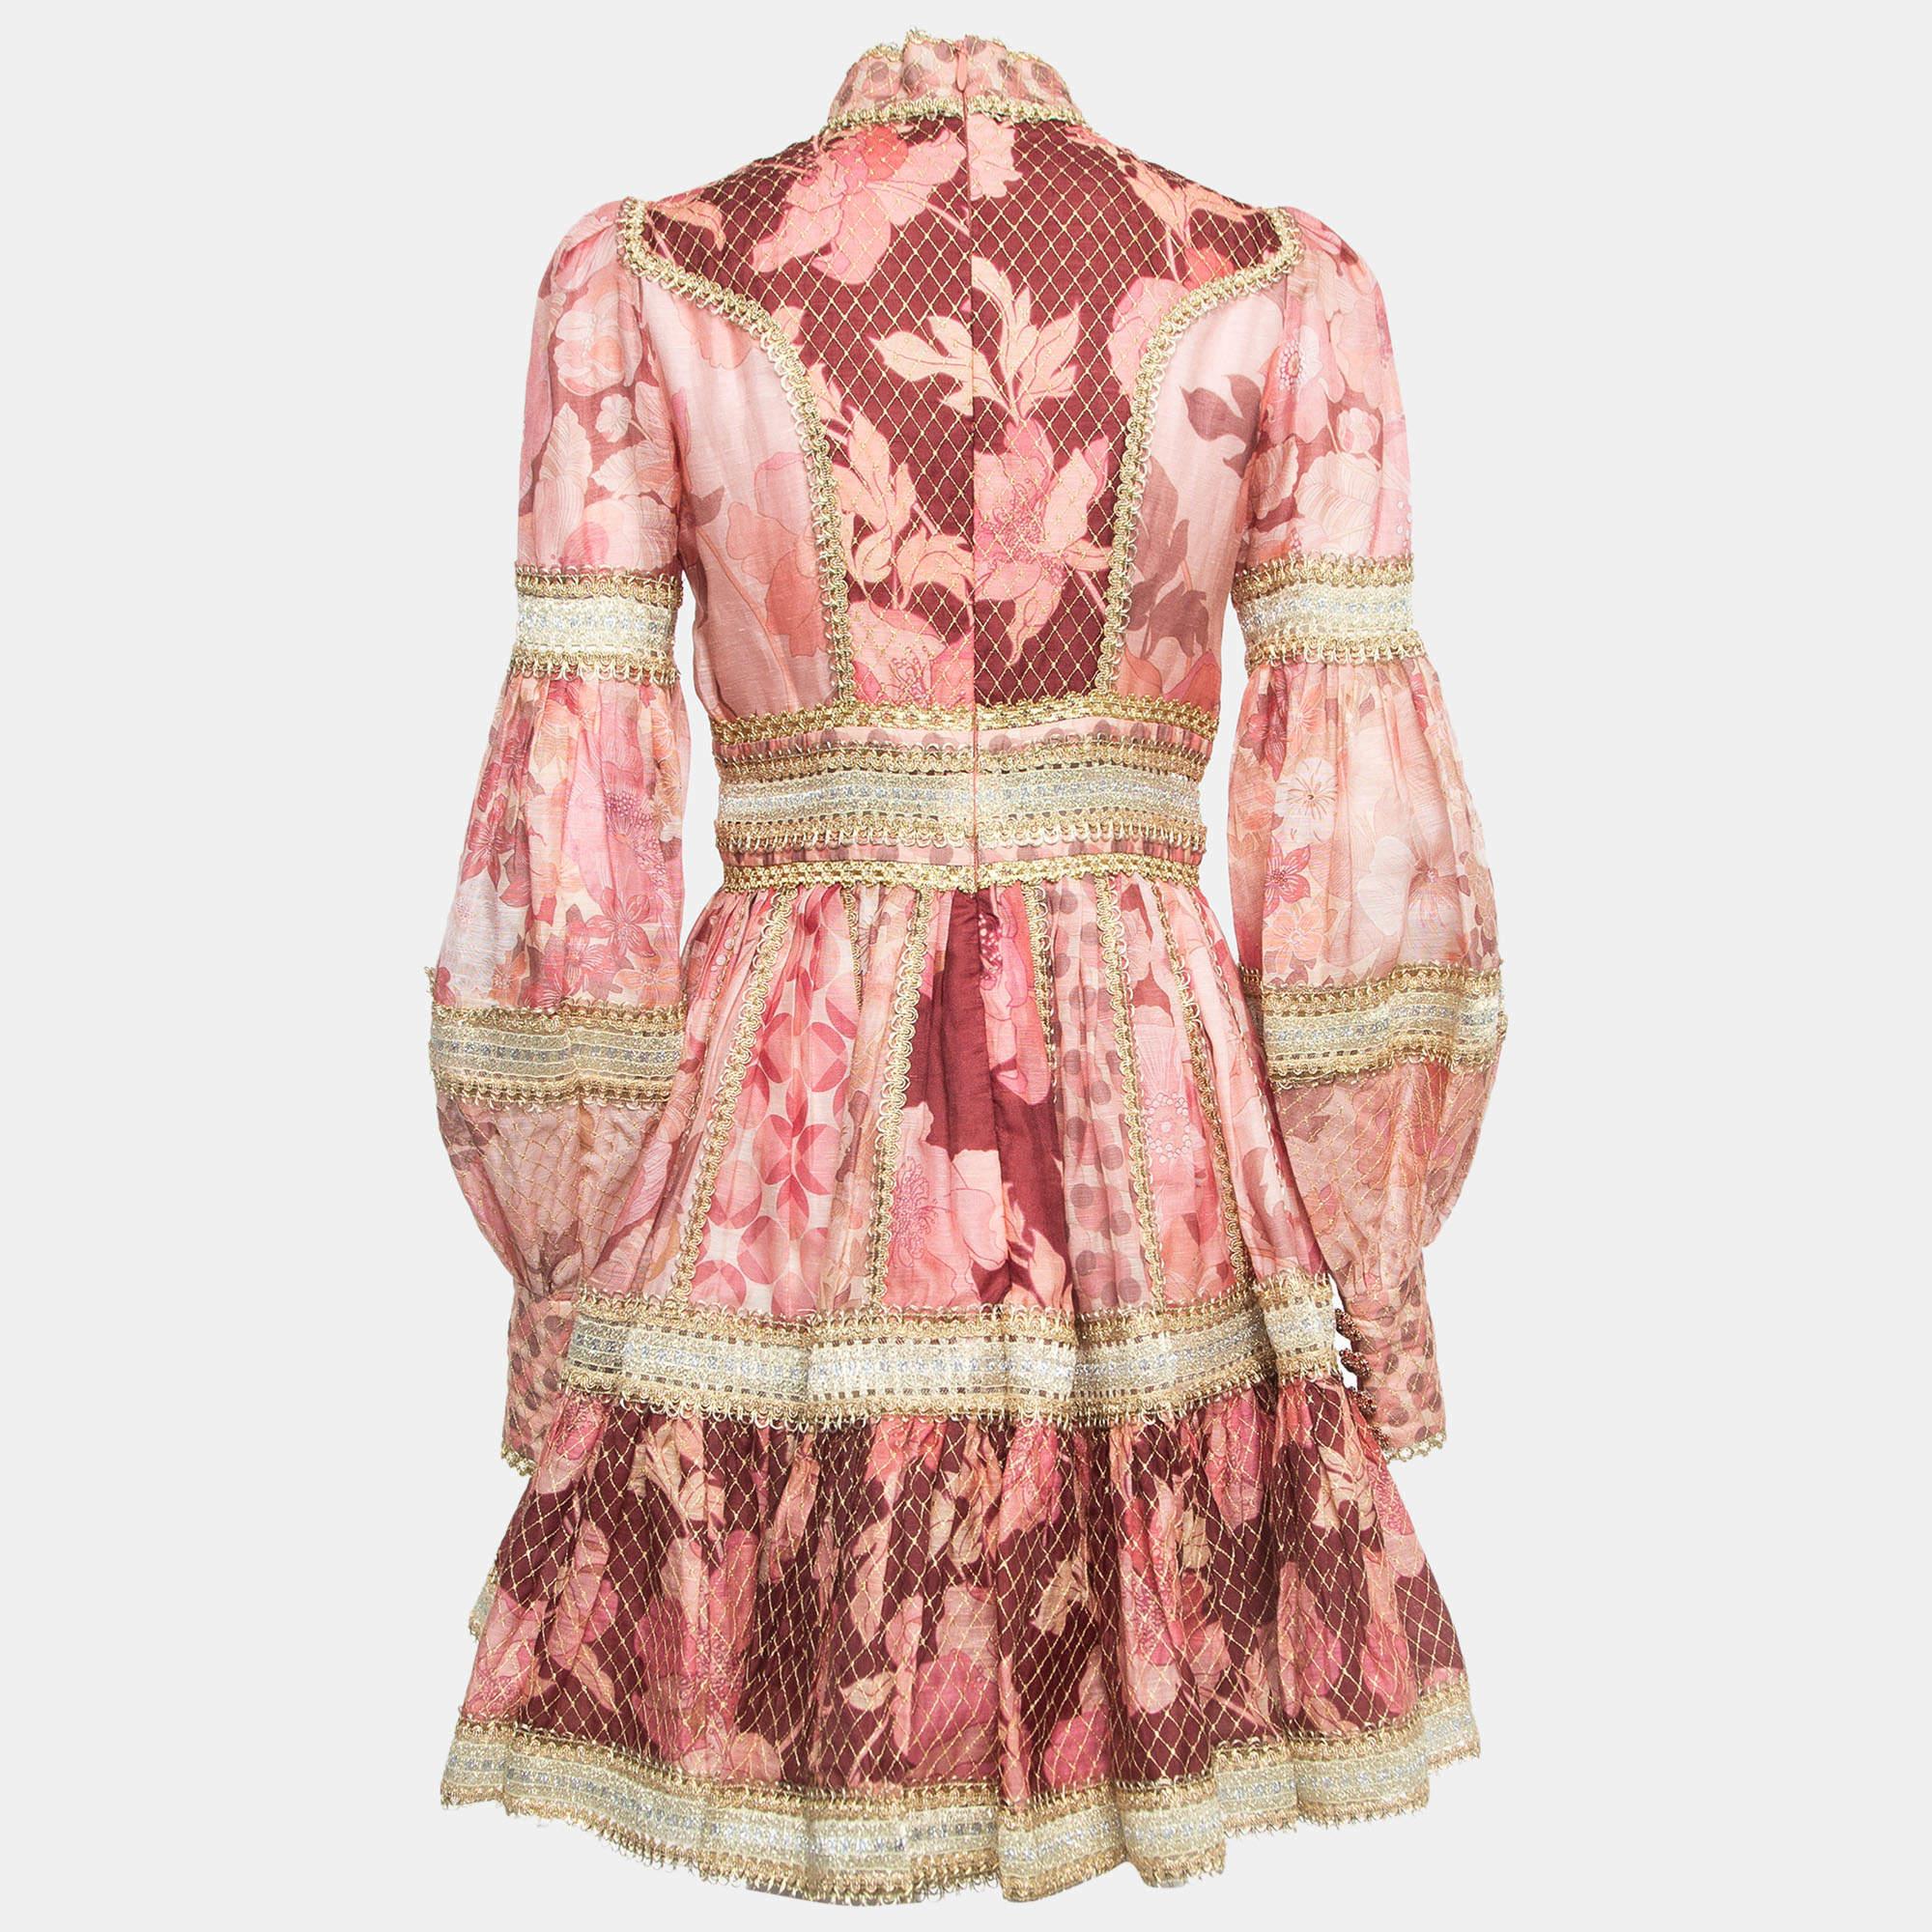 Exhibit a stylish look by wearing this beautiful Zimmermann dress. Tailored using fine fabric, this dress has a chic silhouette for a framing fit. Style the creation with chic accessories and pumps.

